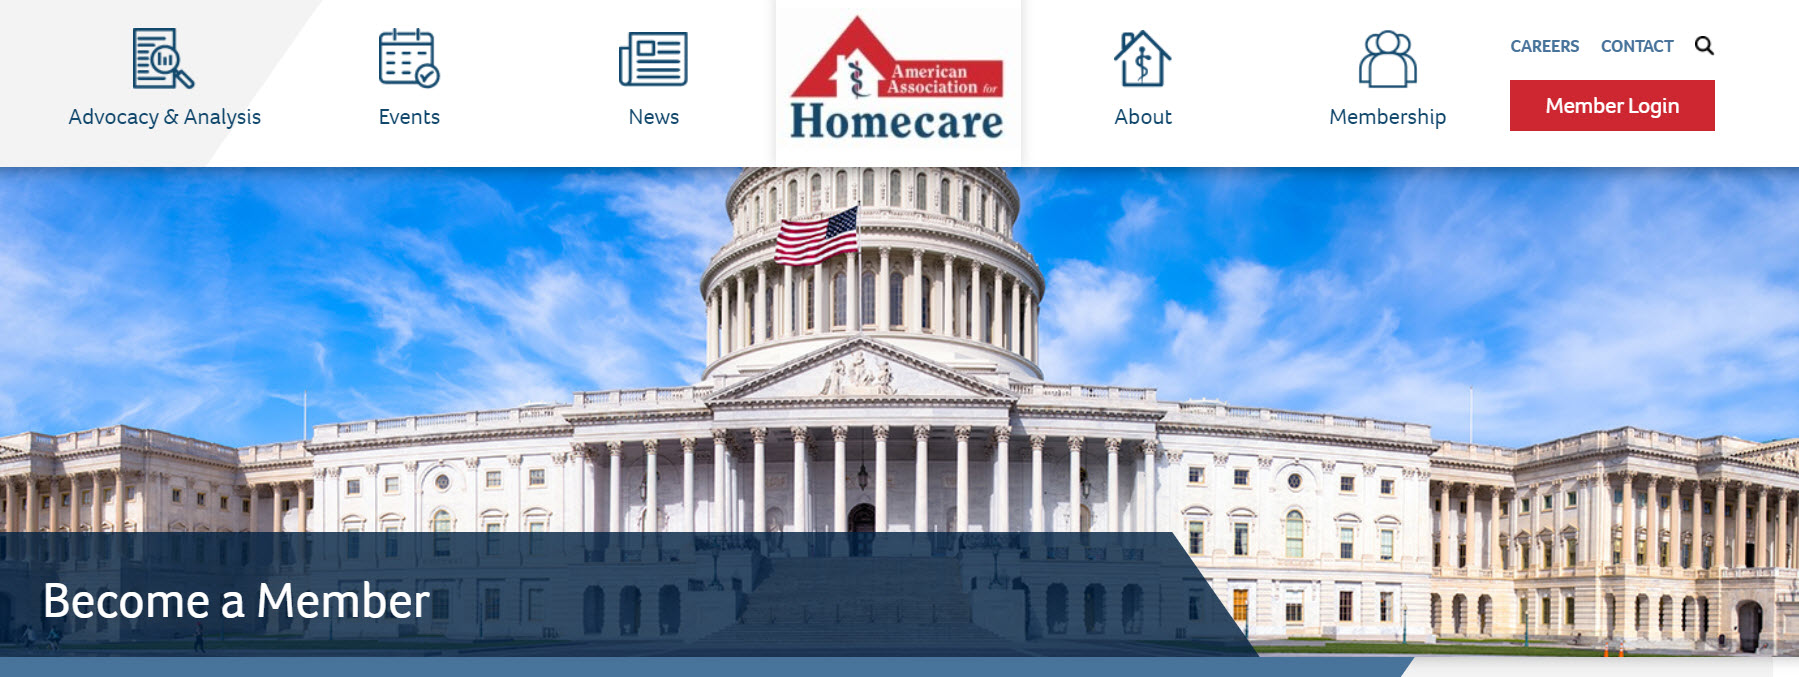 become a member of aahomecare